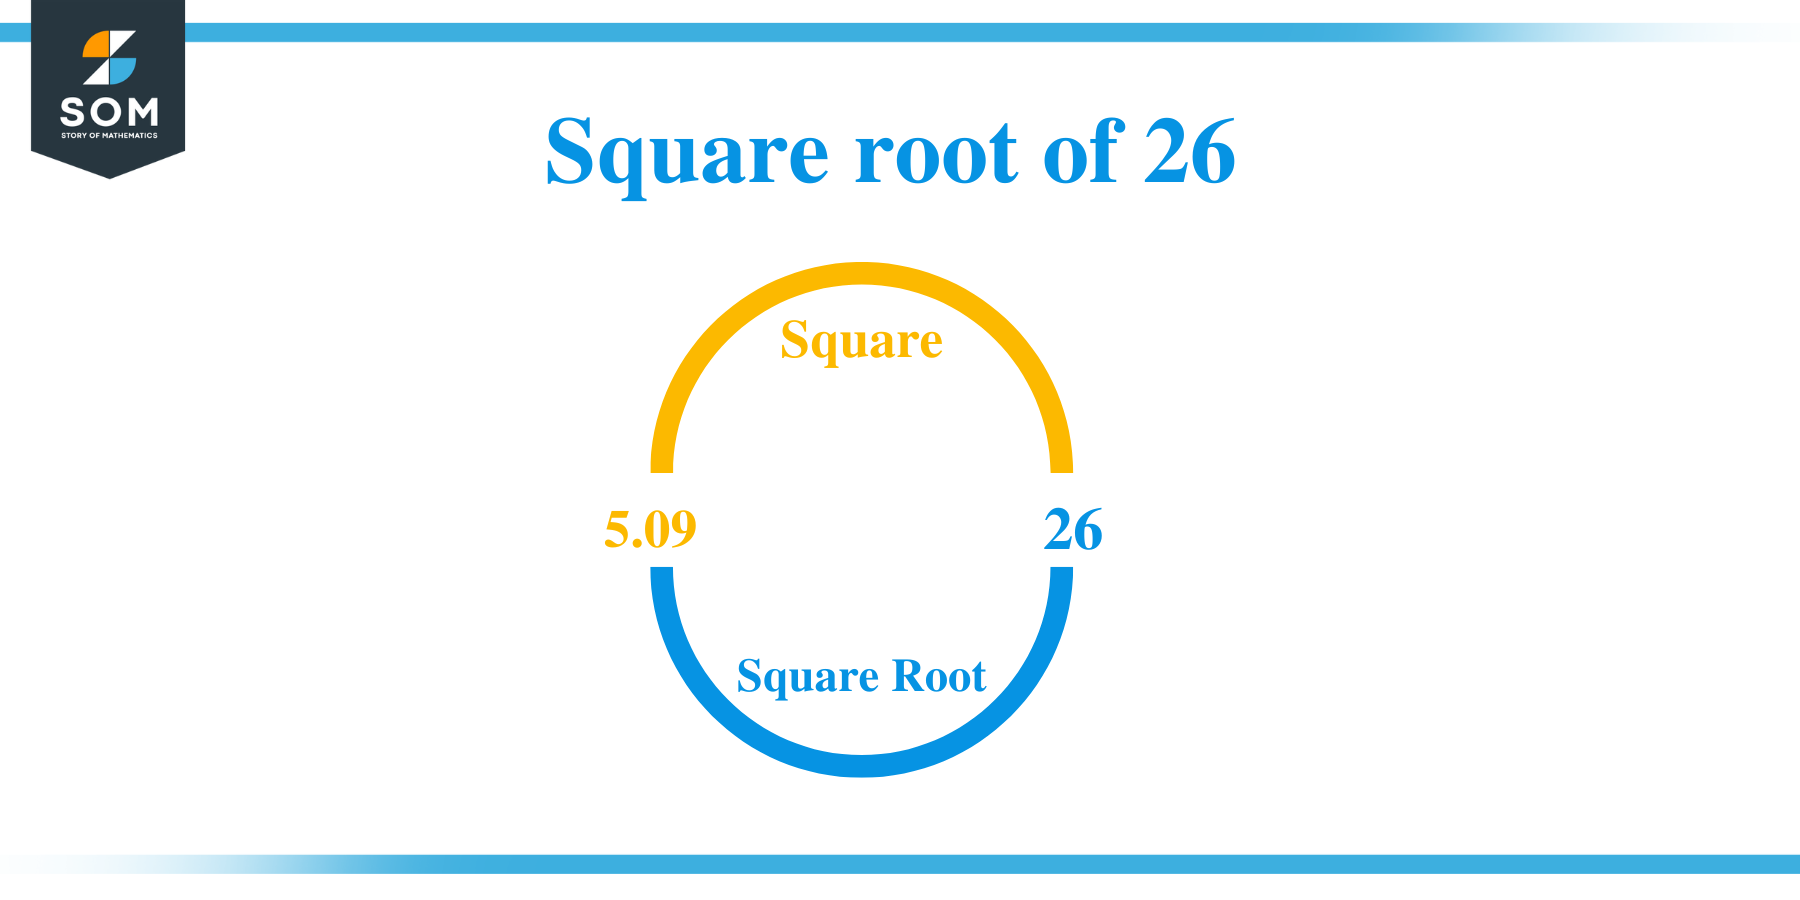 Square root of 26 1